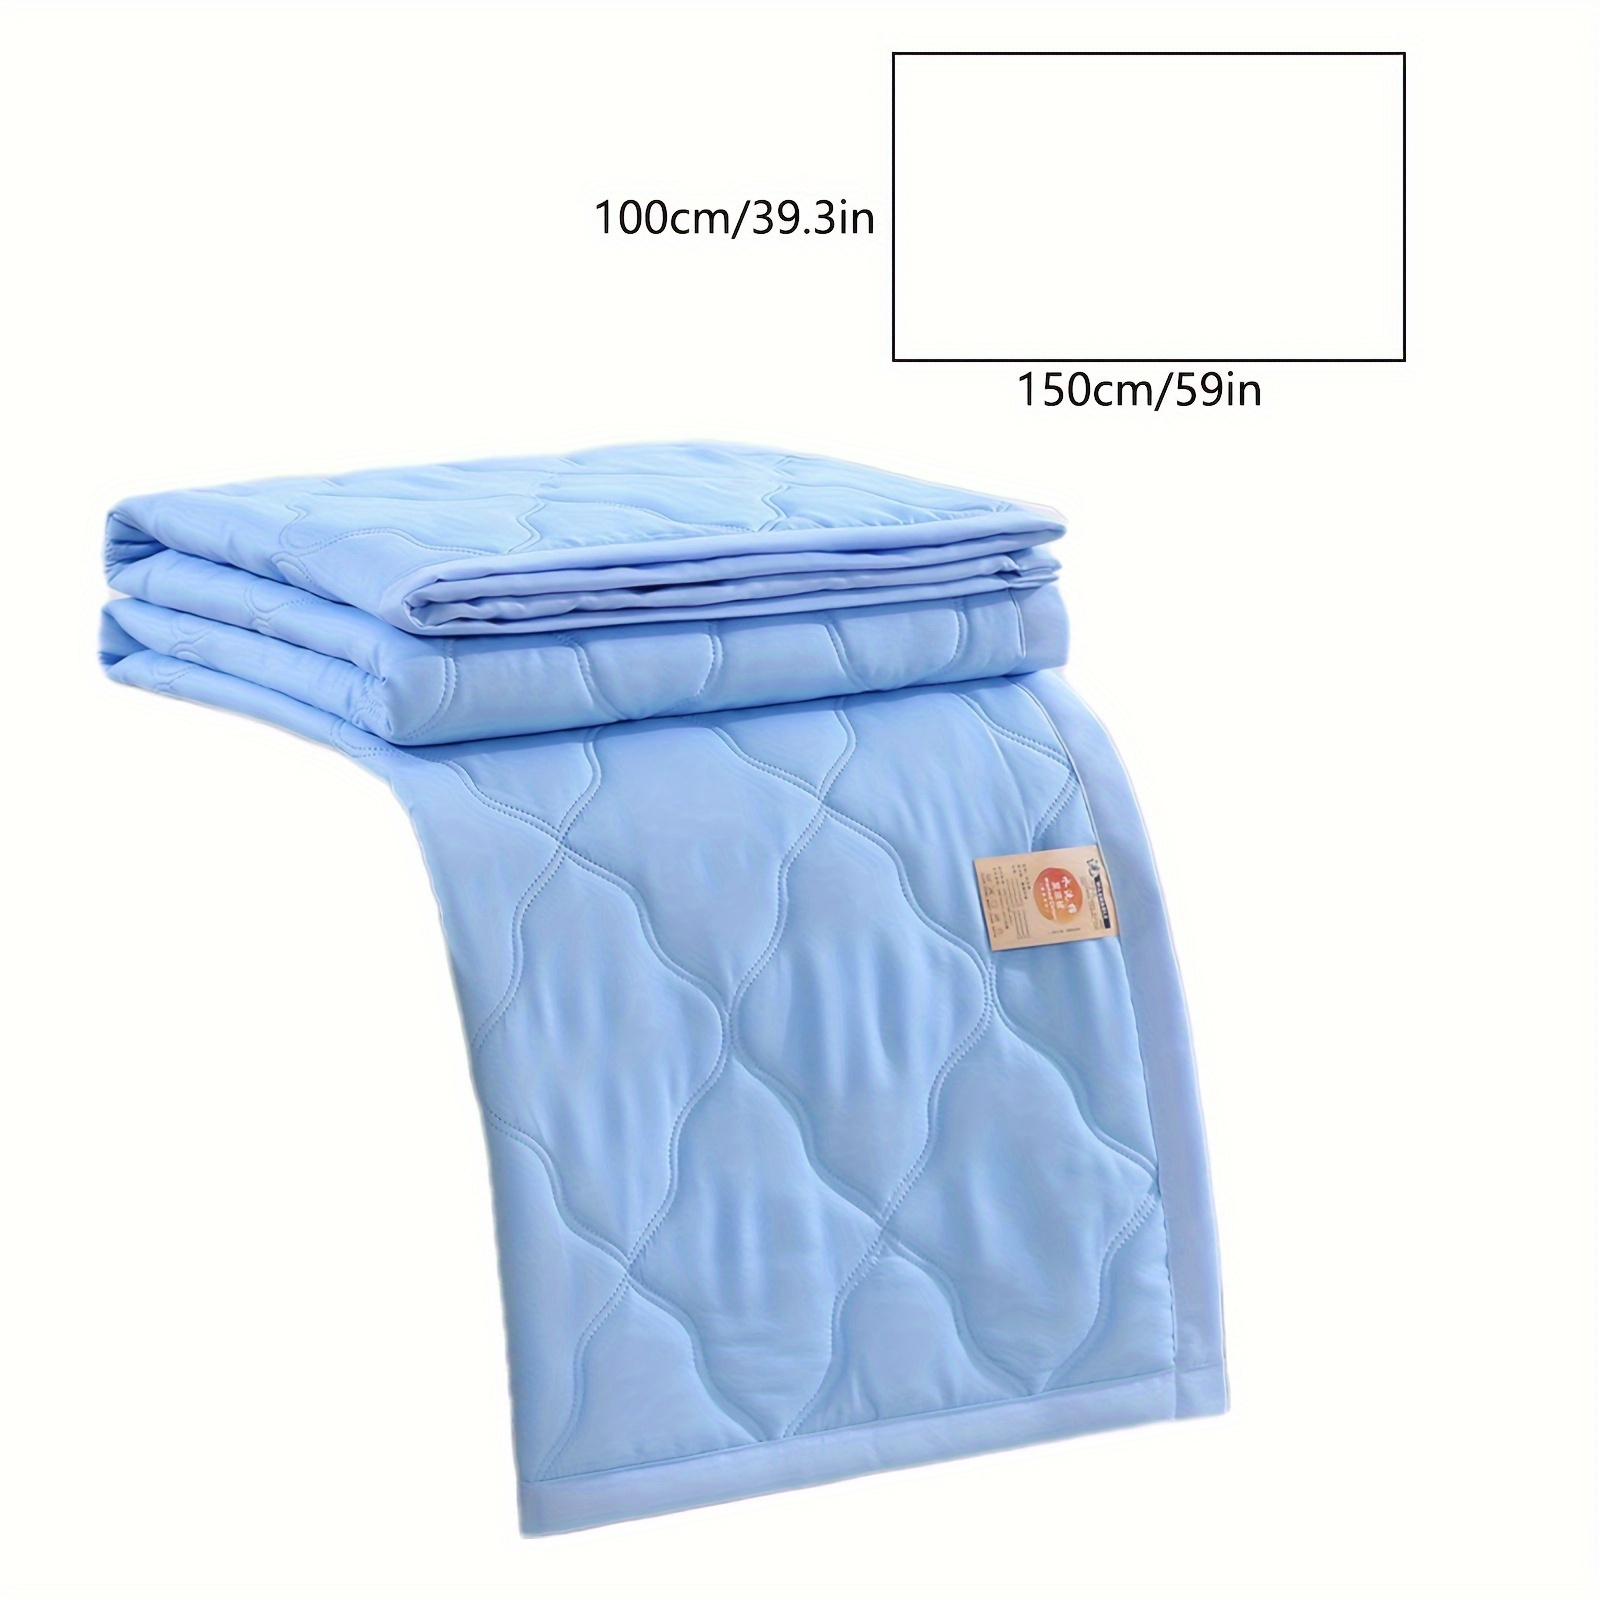 

Cooling Blankets For Hot Sleepers - Cool Like Ice Cream Lightweight Blanket For Summer With Double Side Cold, Cooling Comforter, Quilt, Fabric For Bed